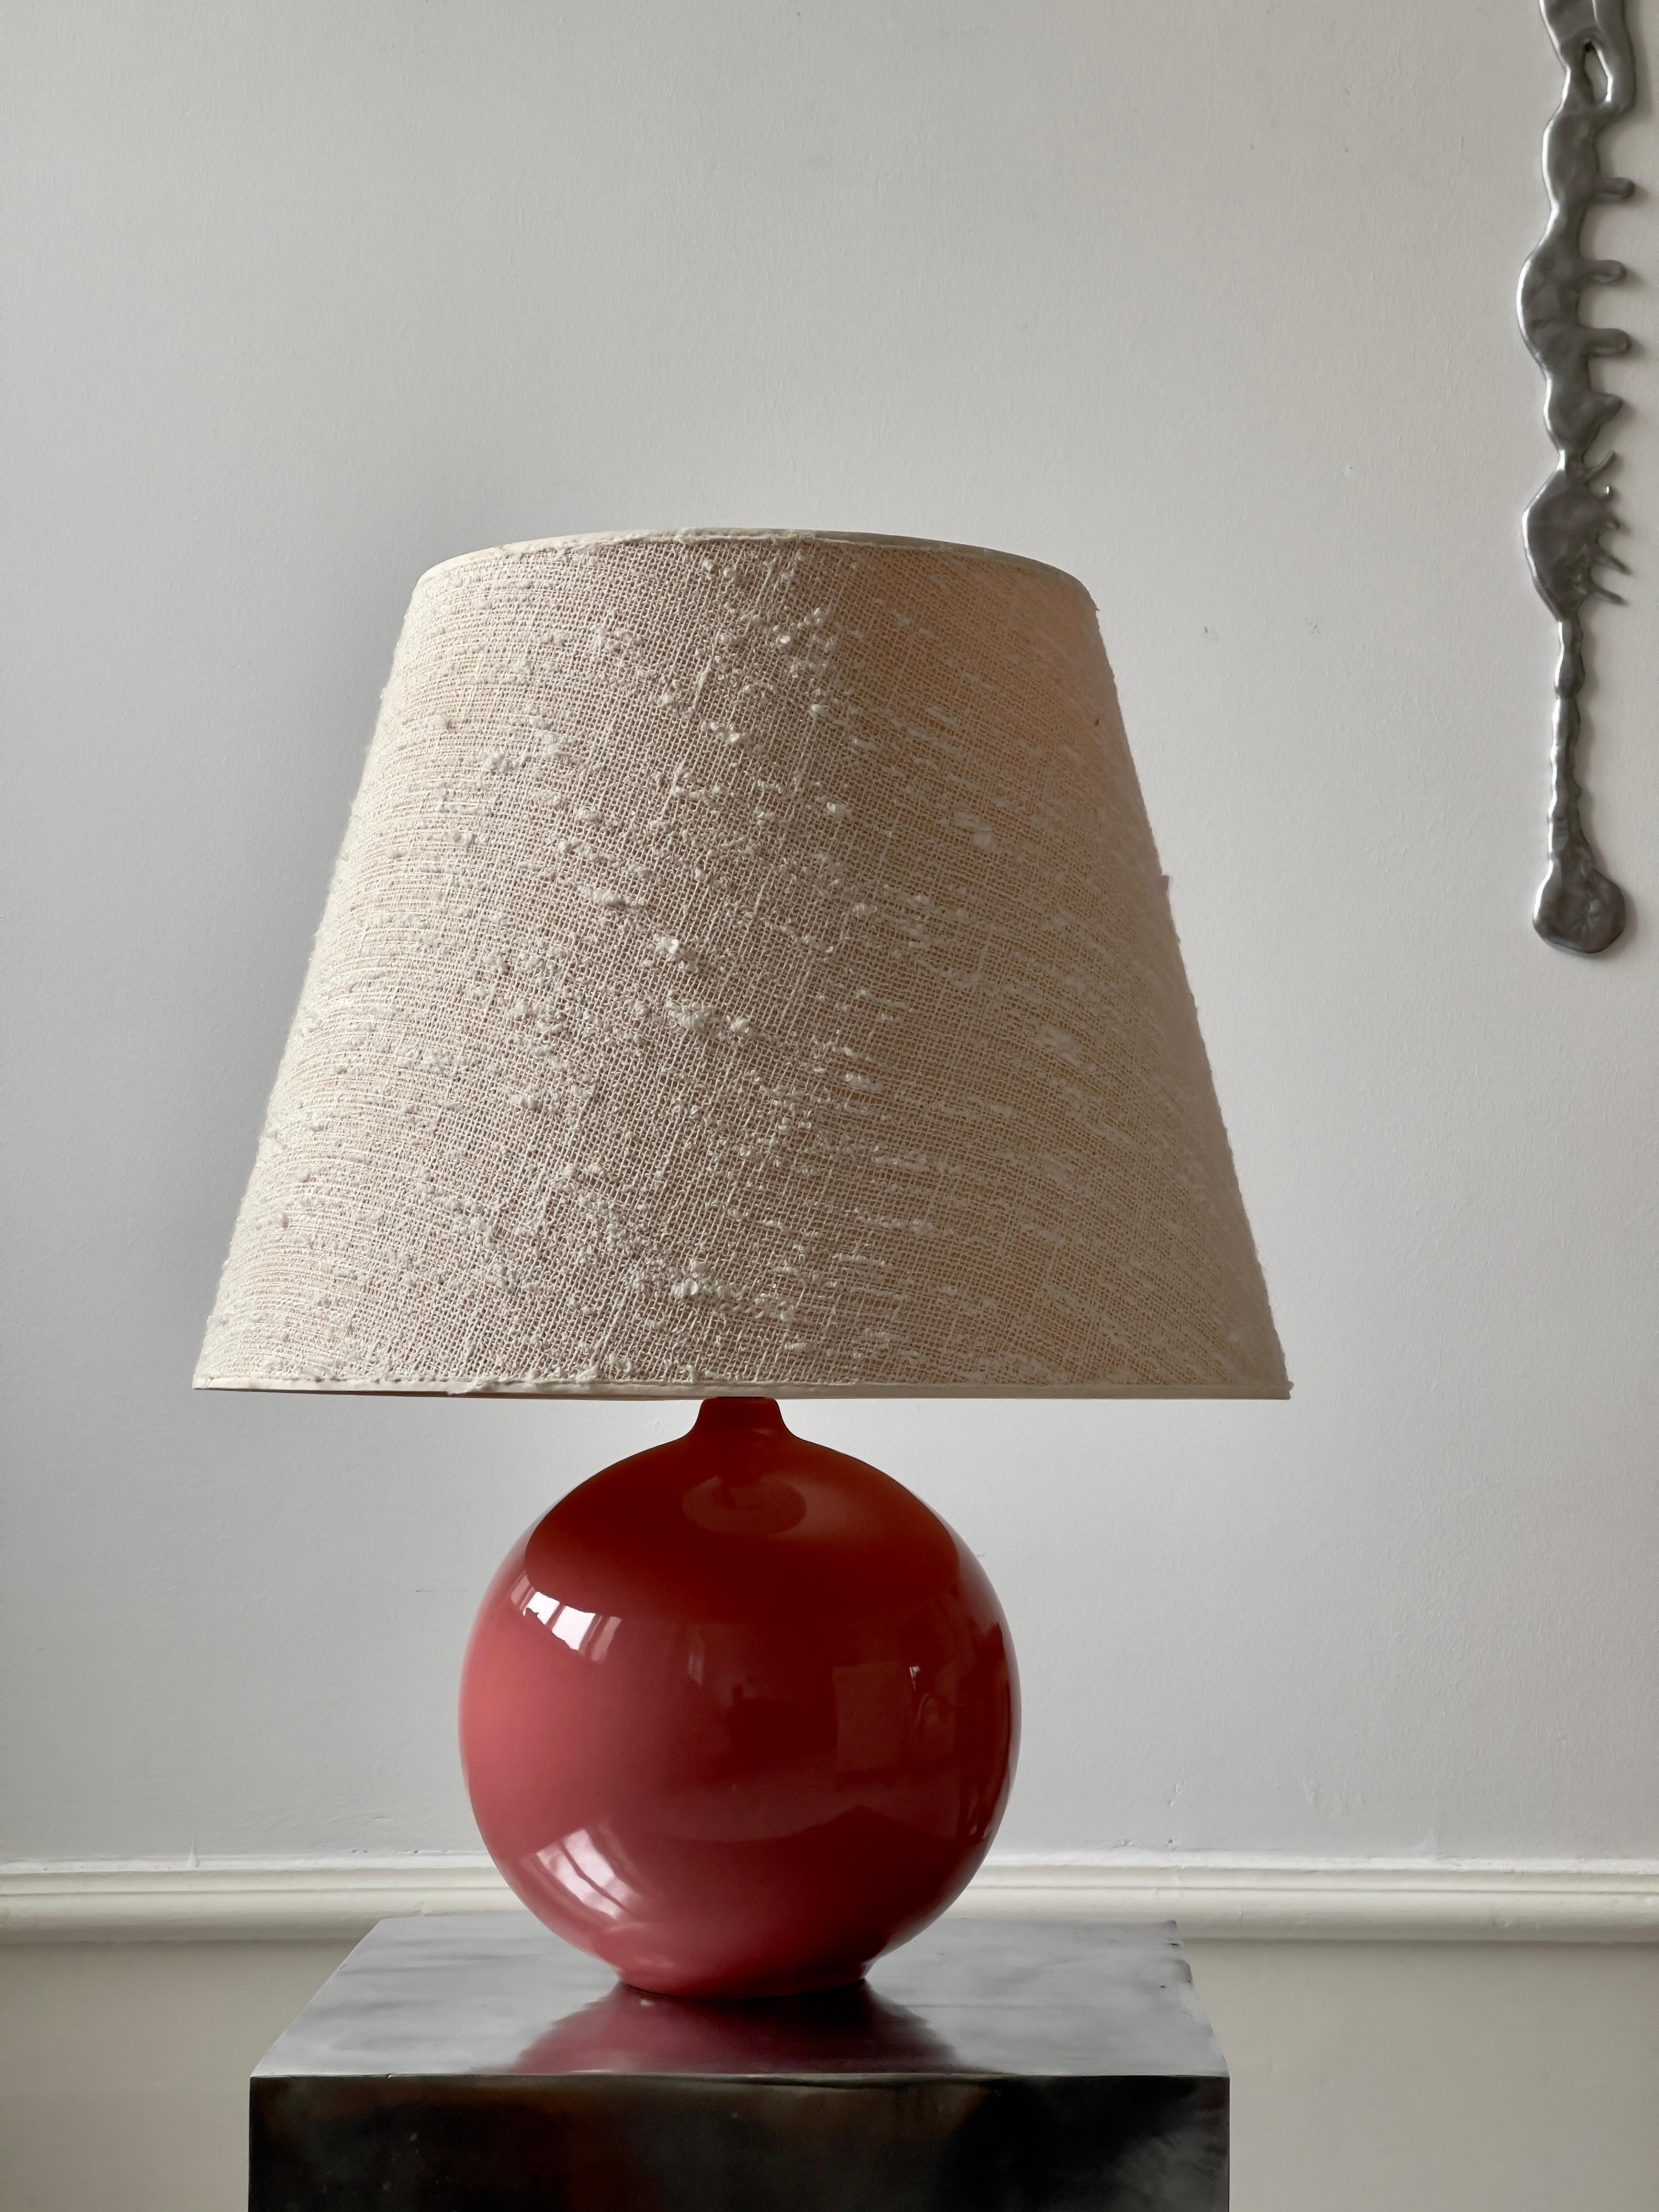 Large round mid-century french table lamp in rose red glazed porcelain. Elegant shape with an almost inflated feel to it. A sophisticated playful drop of color to the cool nordic interior perhaps. Very good condition.
(Rewired in off white fabric